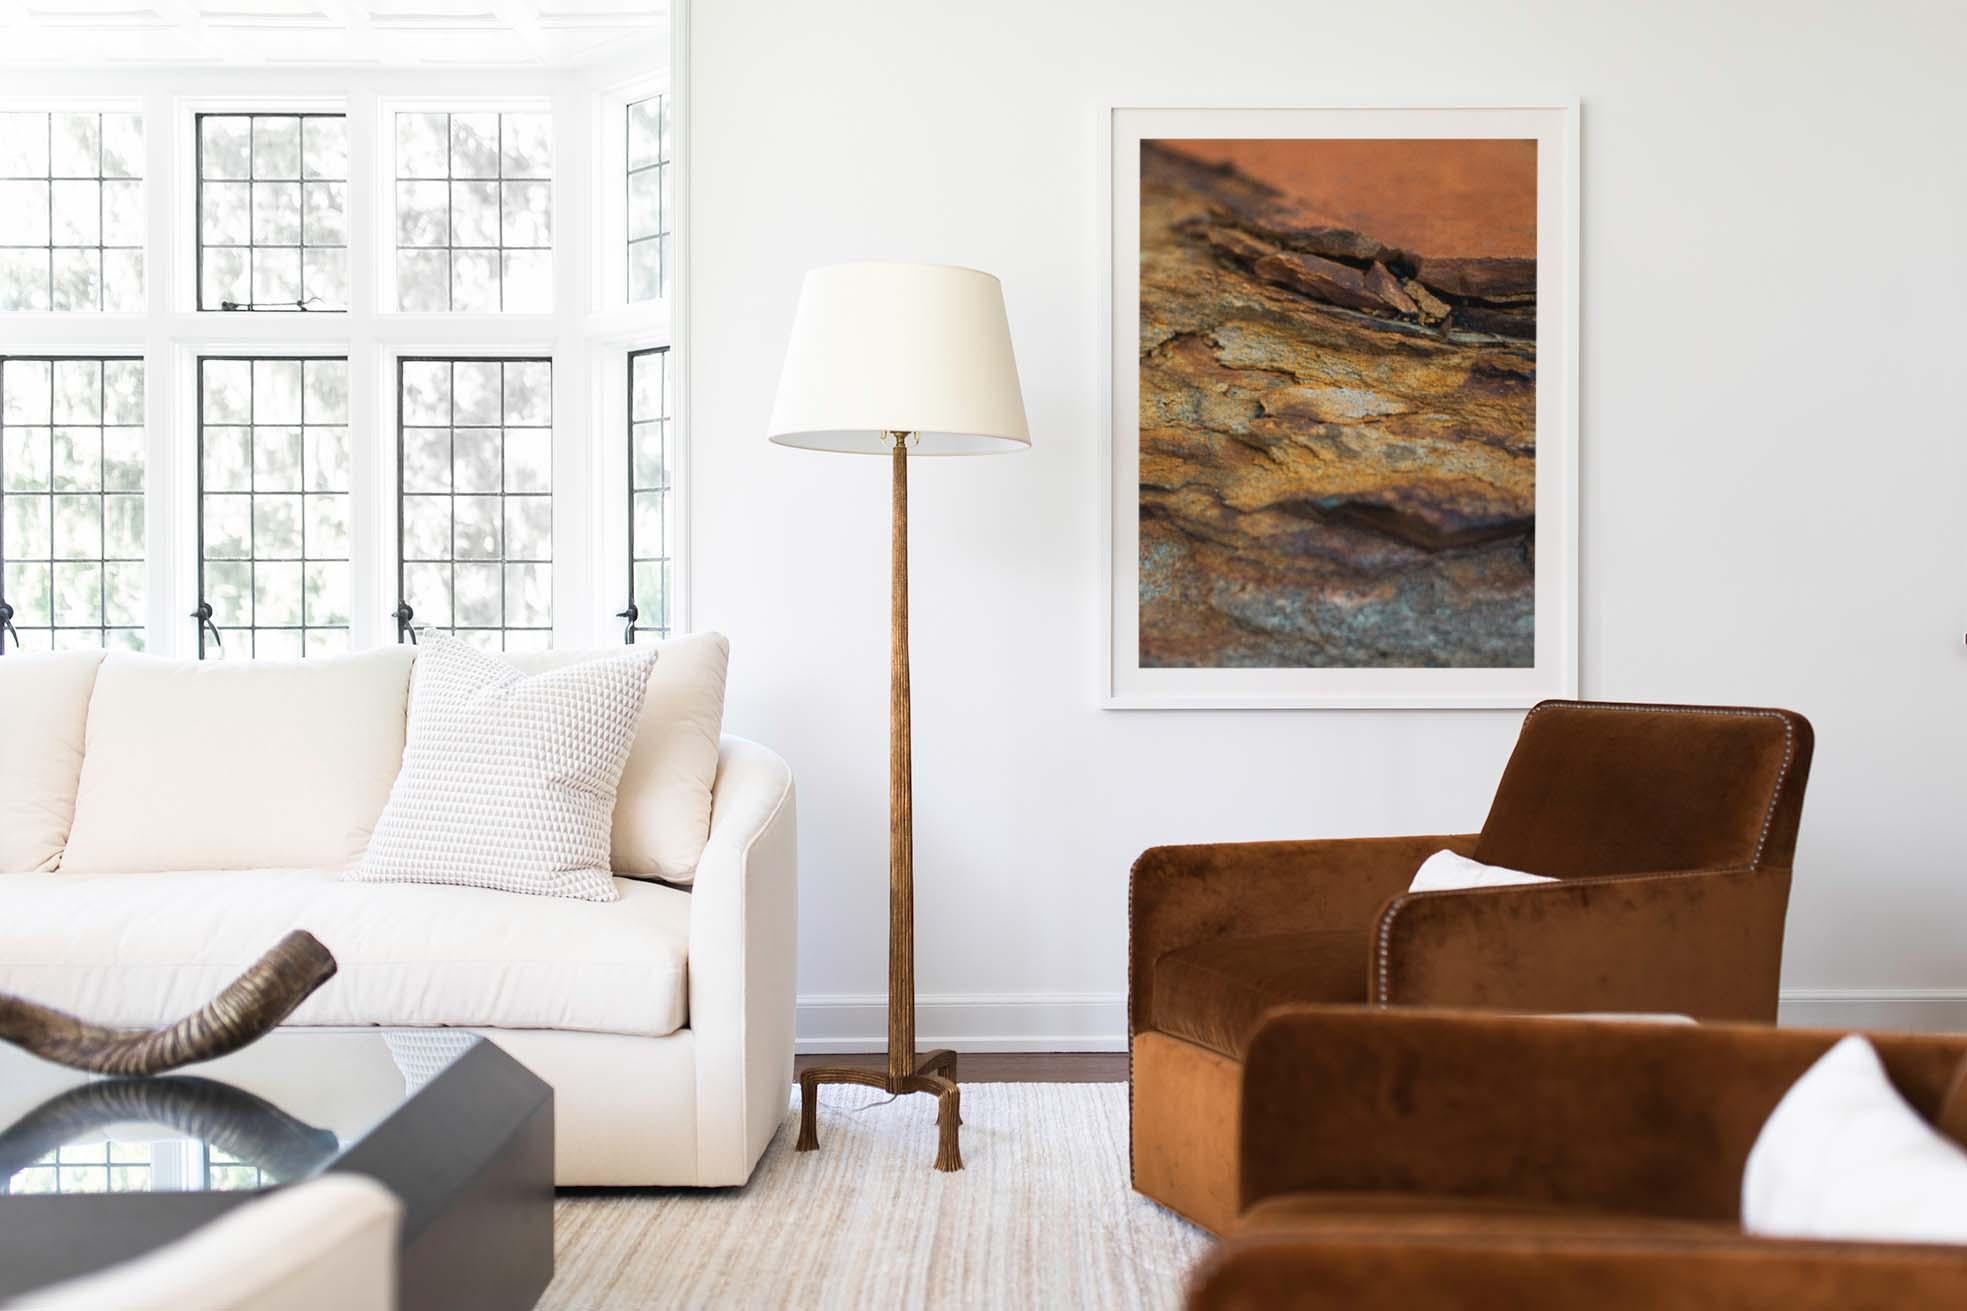 Landscape Photography, Rock Prints, Large Wall Art-Splintered Amber

ABOUT THIS PIECE: 
This art photography piece named 